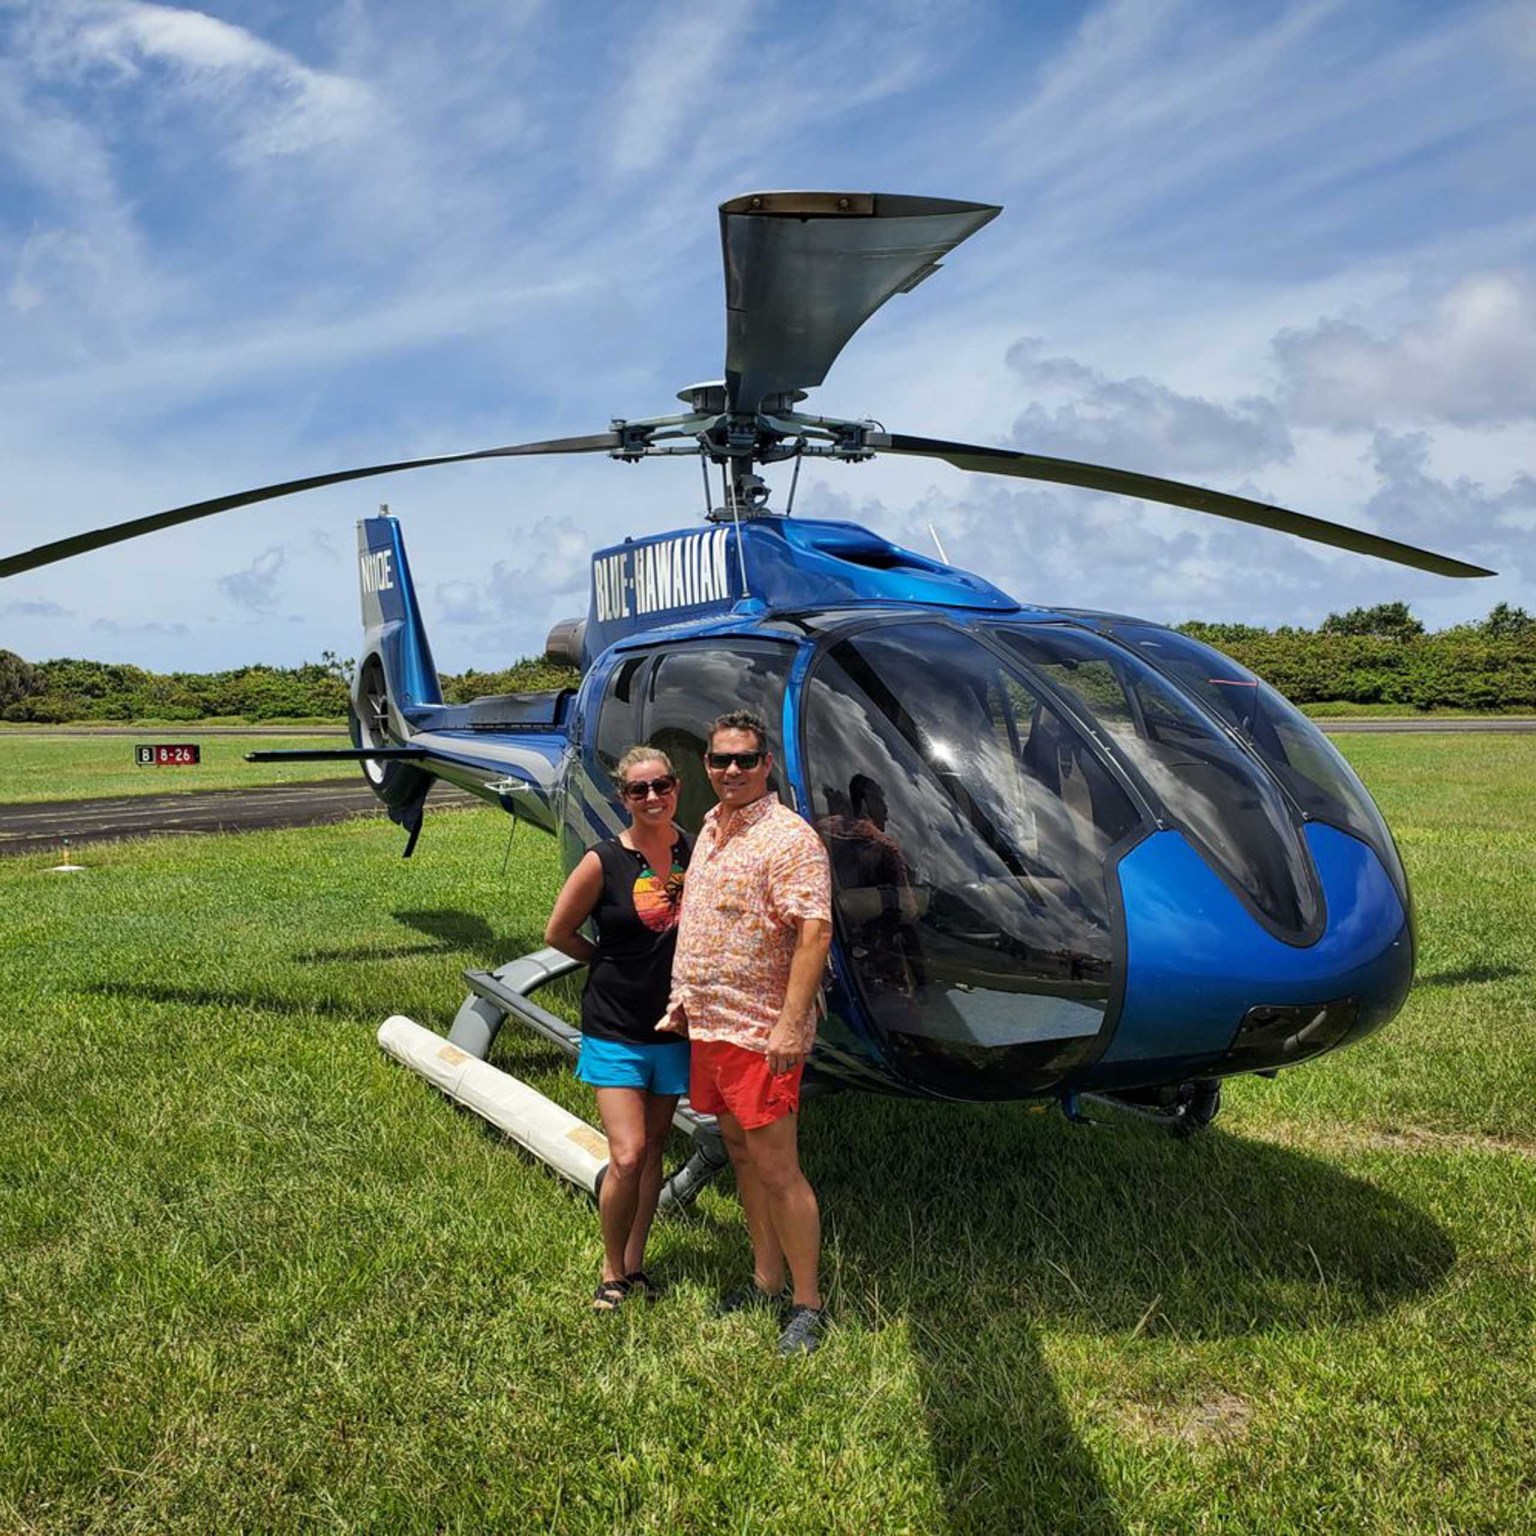 Road To Hana Helicopter Tour The Best Helicopter Tour in Maui